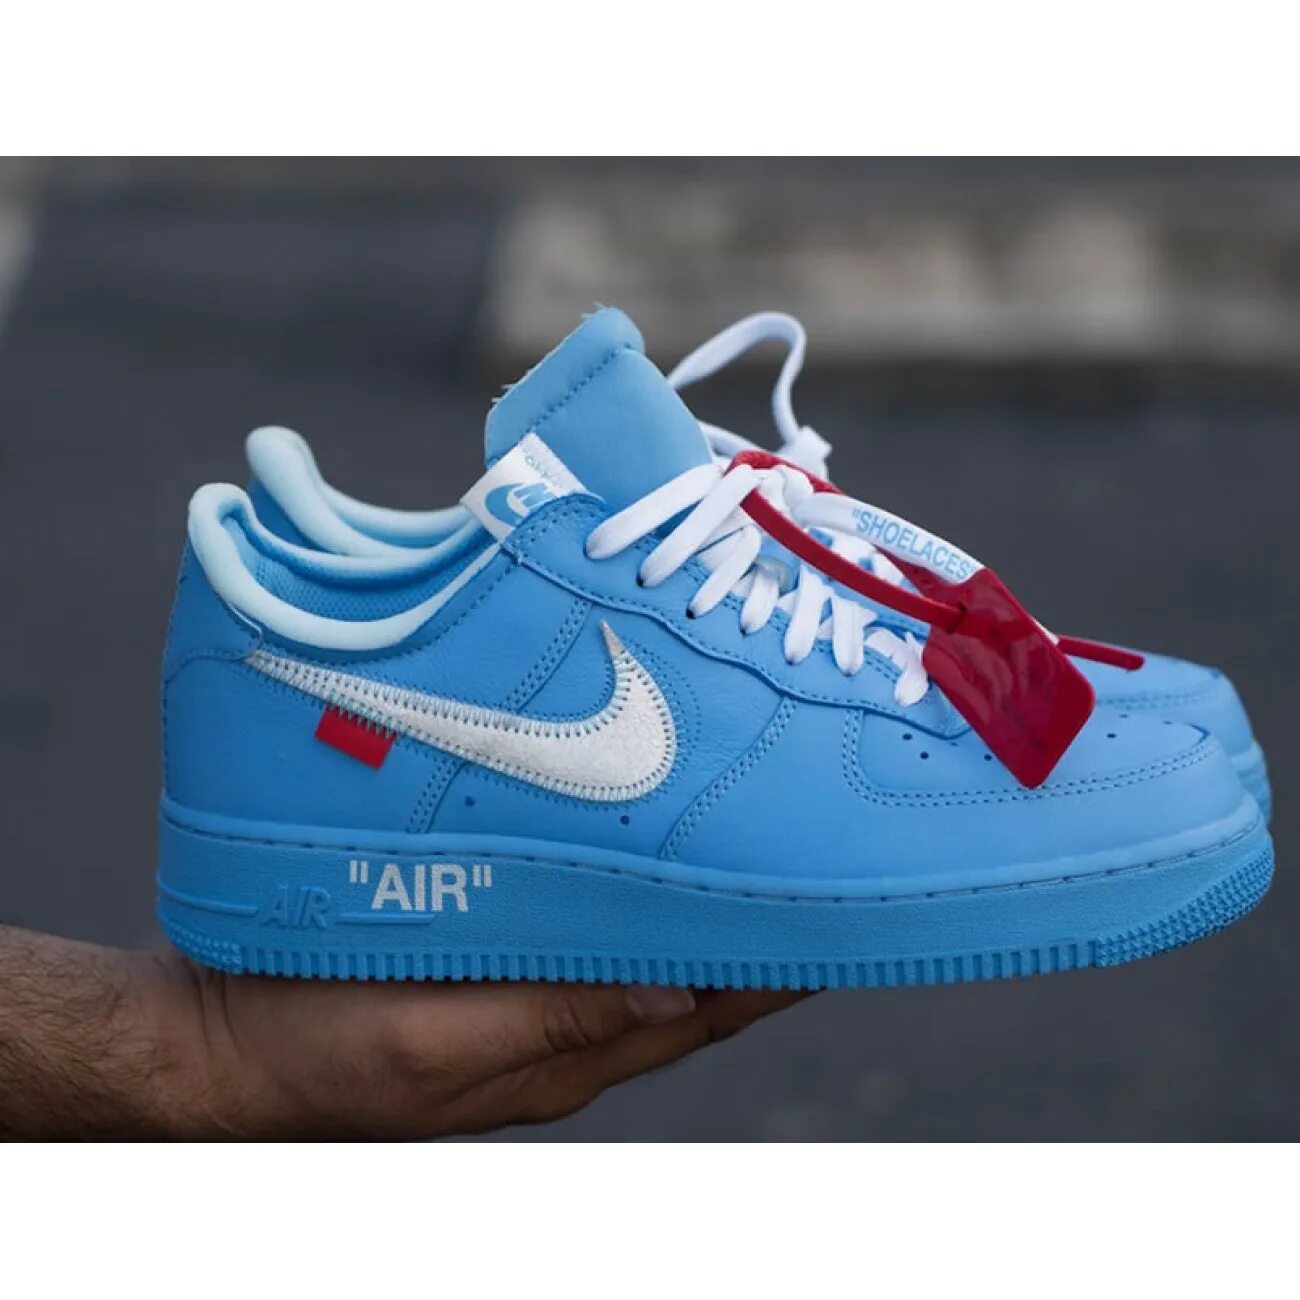 Nike Air Force 1 off. Nike Air Force 1 off White. Nike Air Force 1 Blue. Nike Air Force 1.